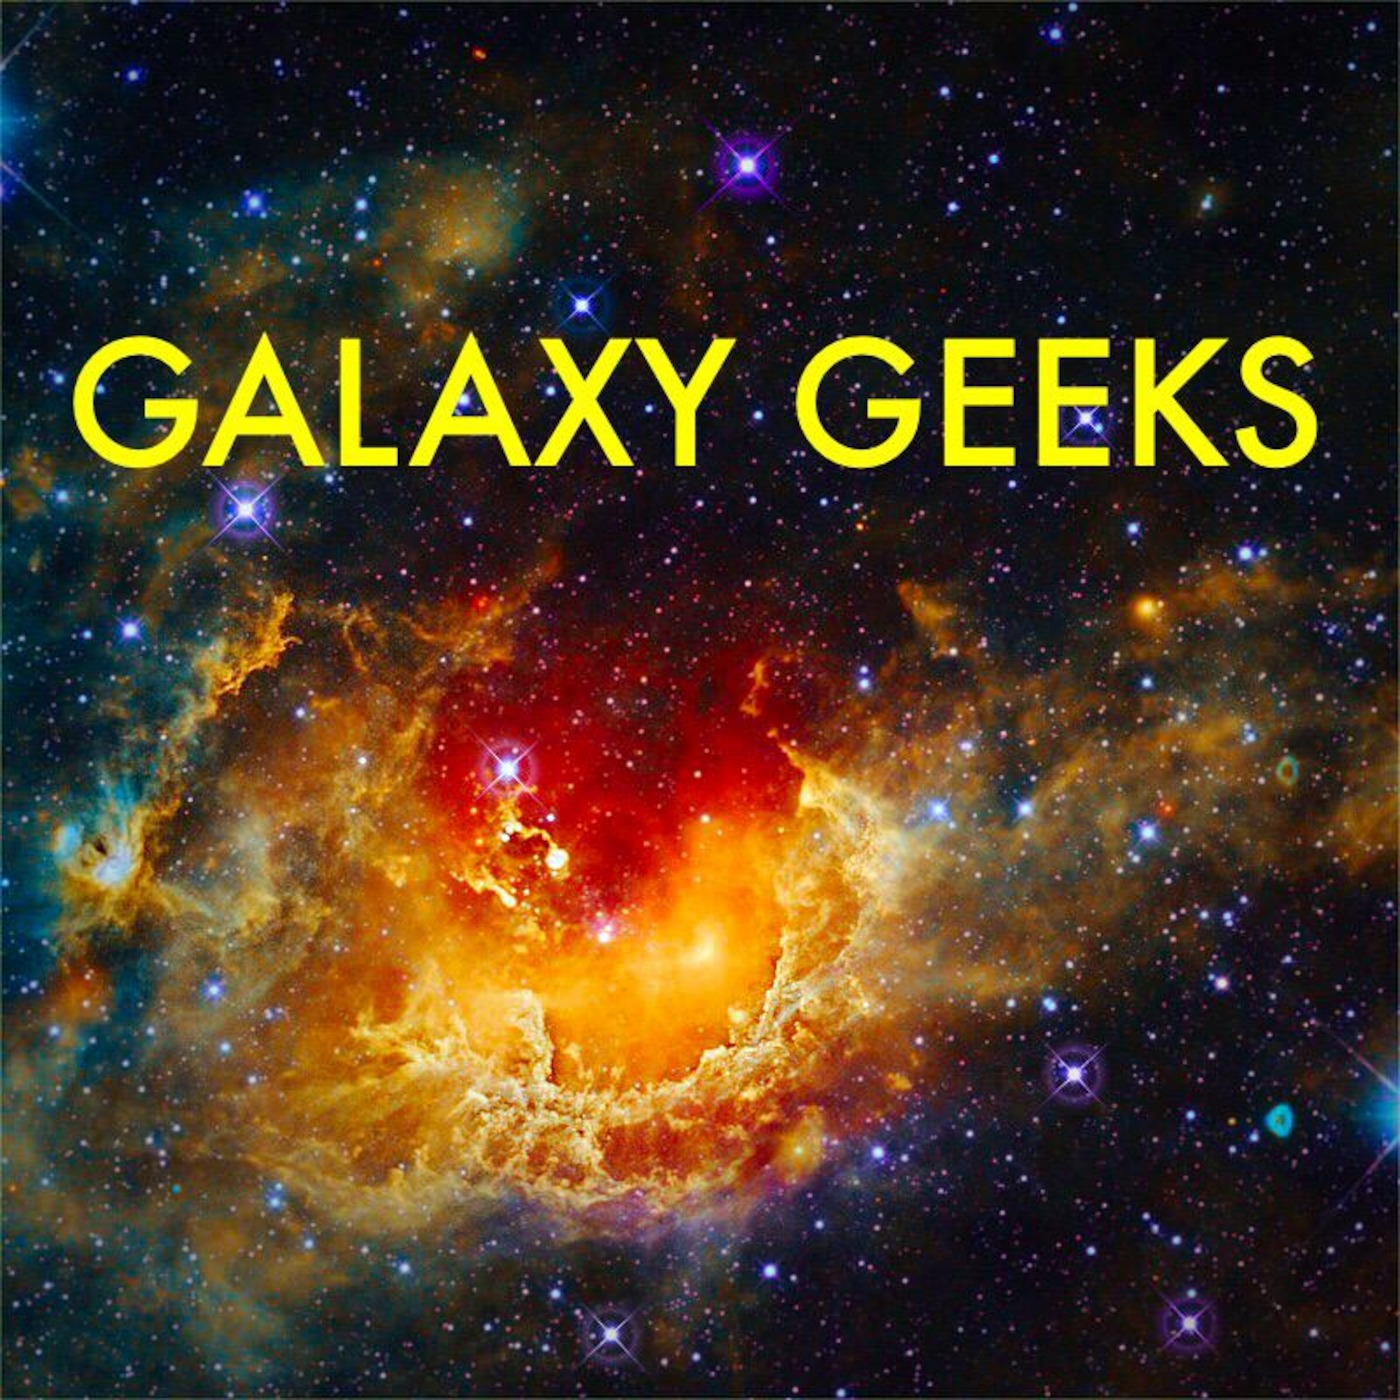 The Galaxy Geeks' Podcast